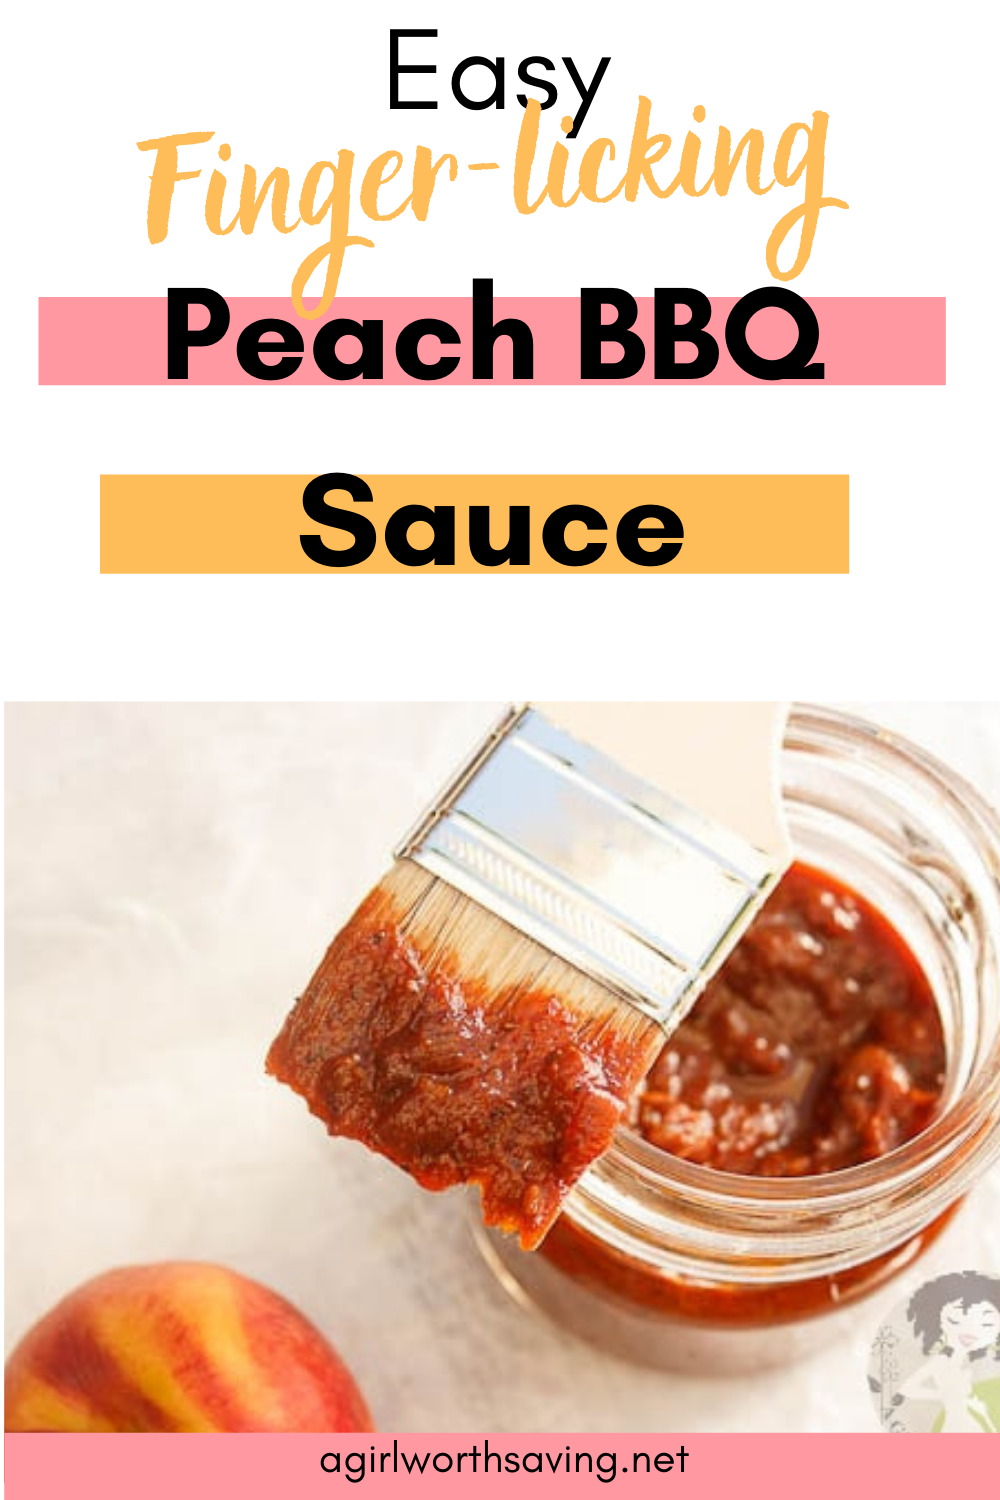 This simple Peach BBQ Sauce recipe uses fresh peaches to wow your taste buds. You'll smother this on all your grilled meats and fruit for an extra special meal.